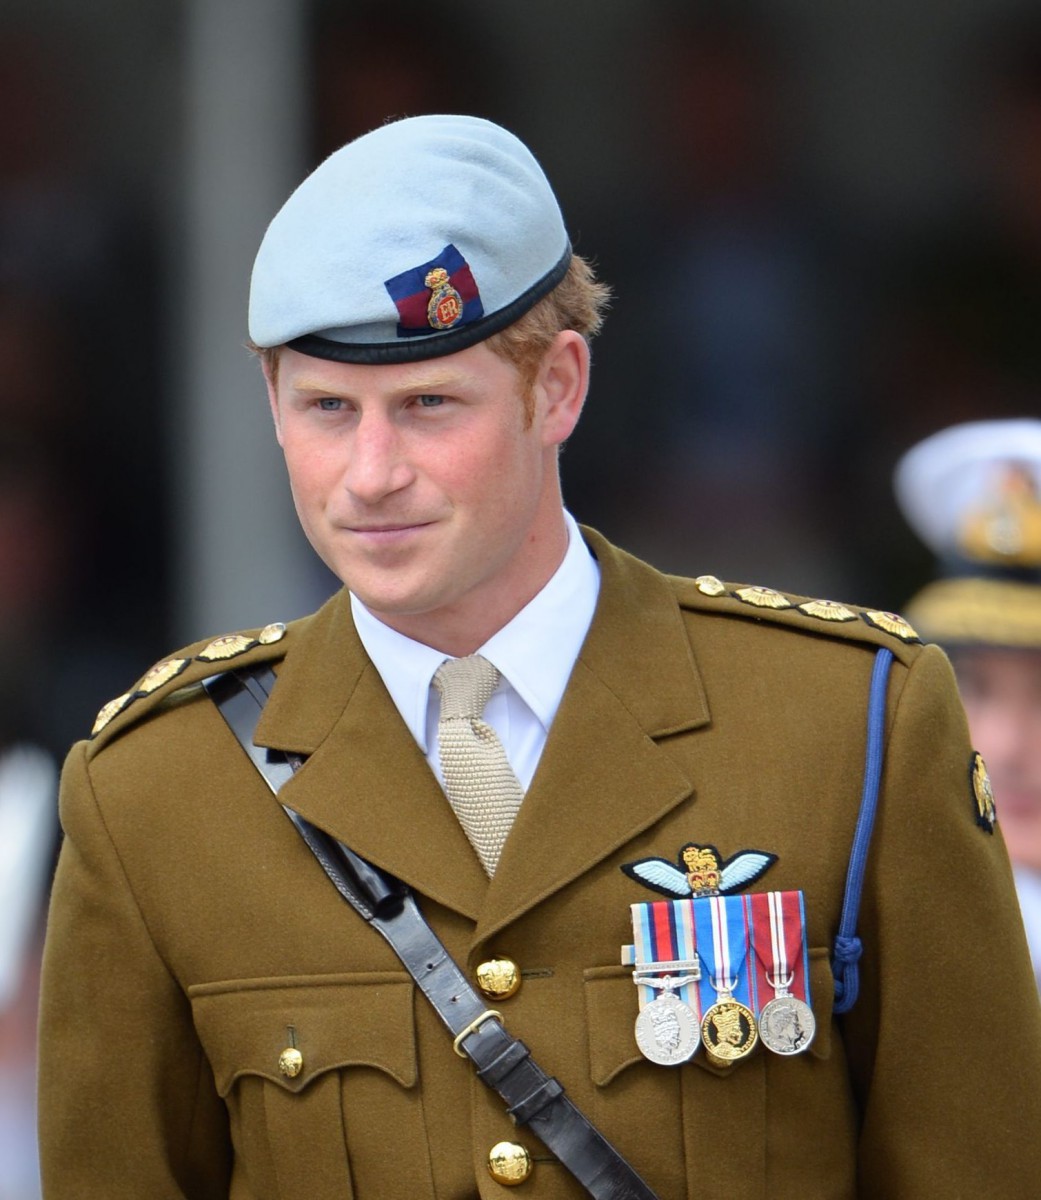 Prince Harry has had to give up his military titles